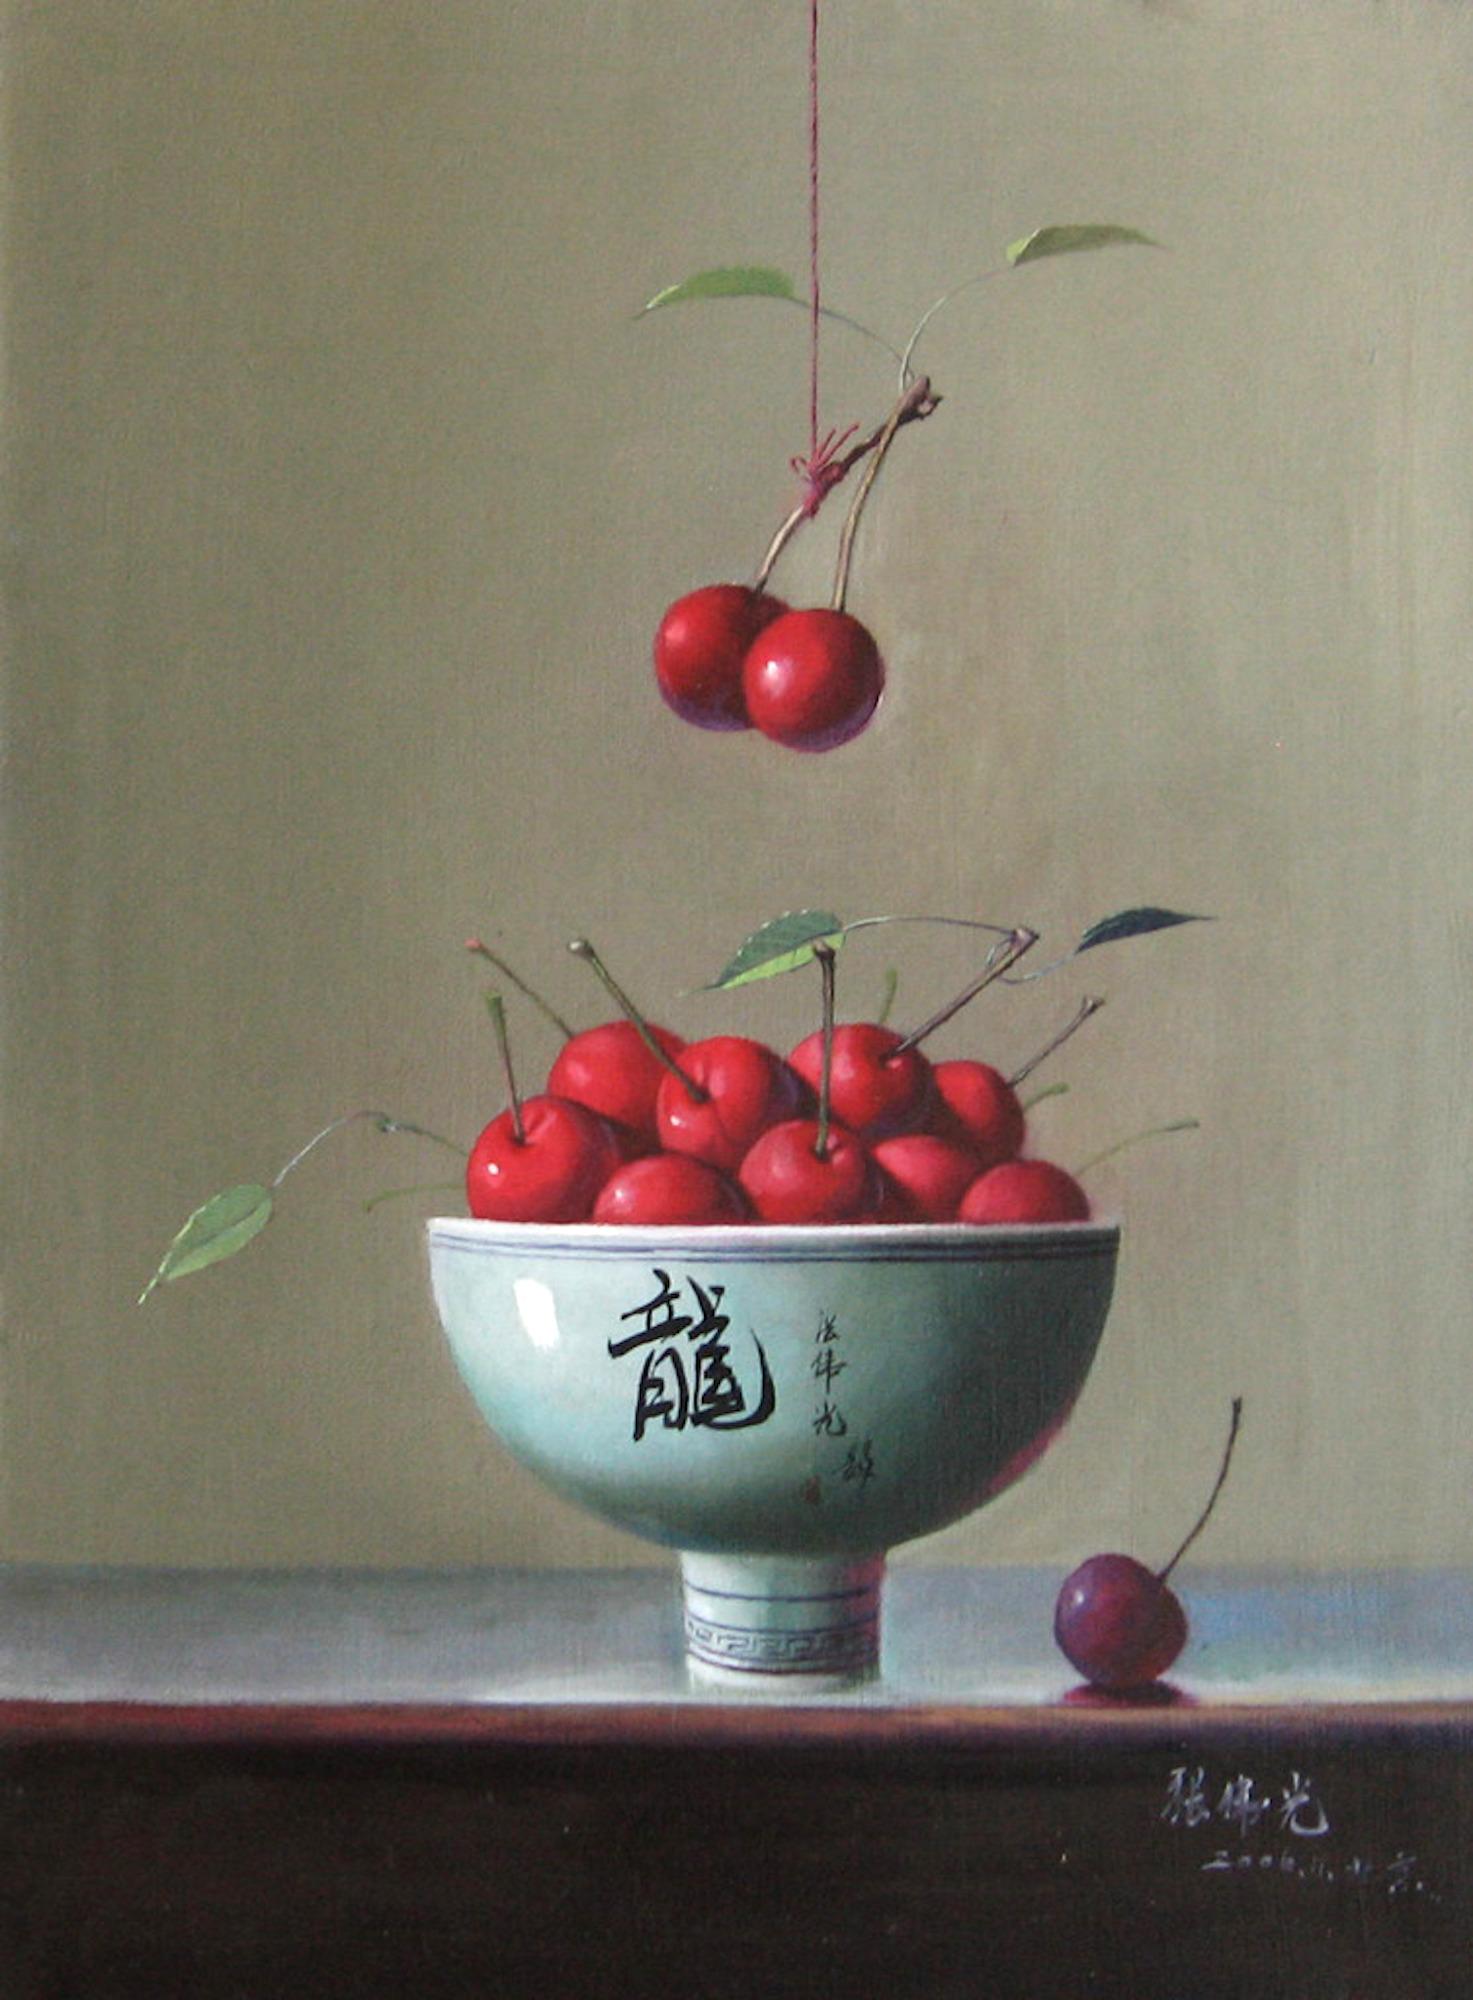 Cherries - Oil on Canvas by Zhang Wei Guang - 2000s